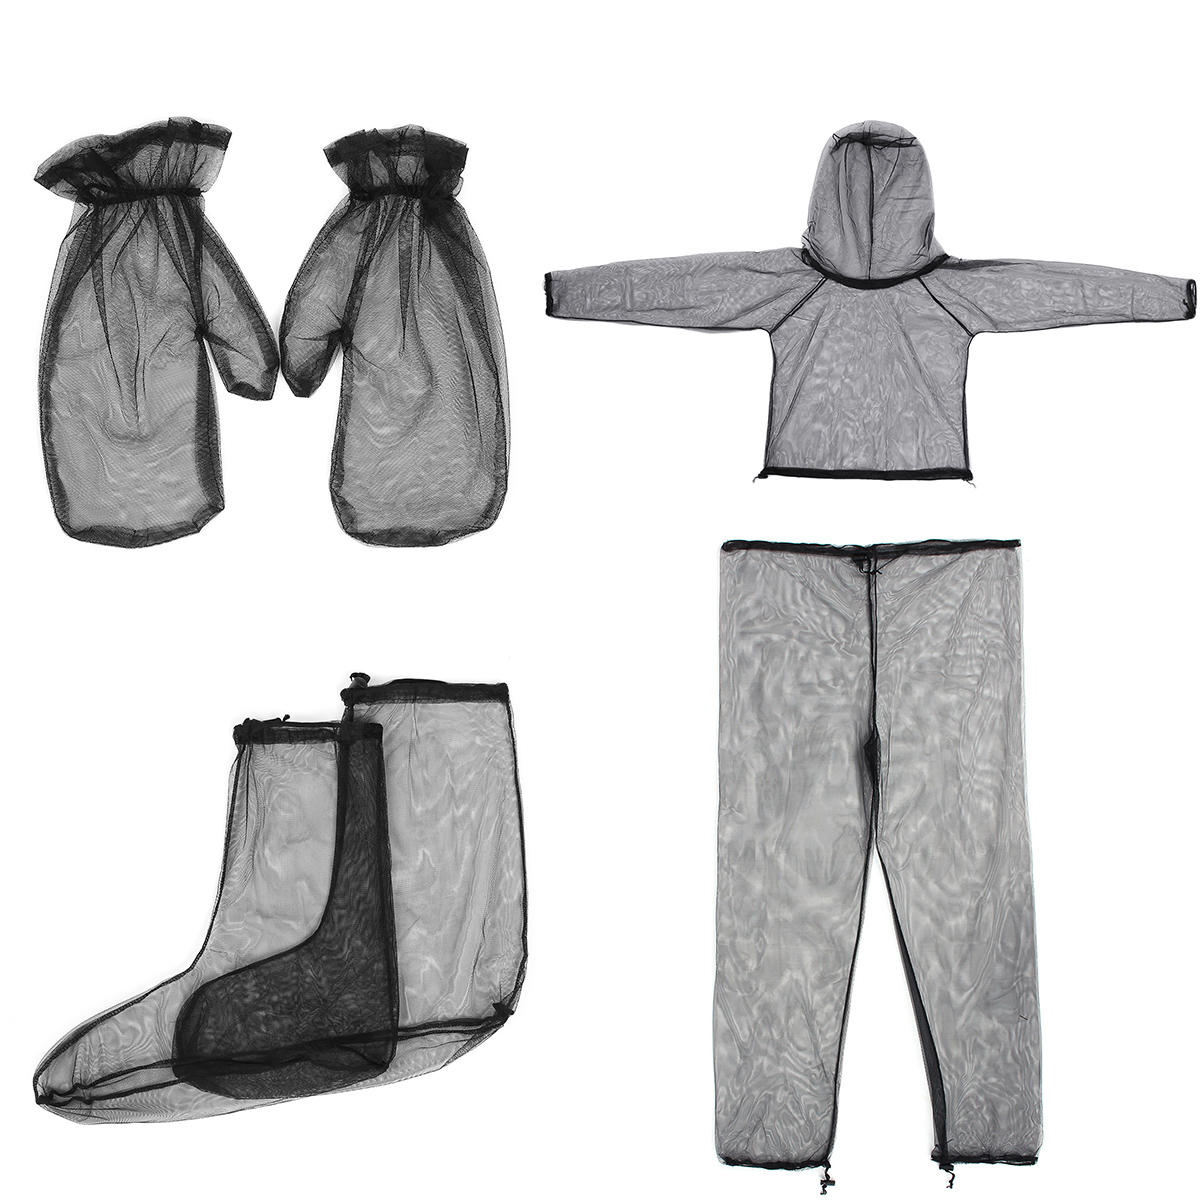 4PCS Jacket+Pants+Gloves+Feet Mosquito-proof Suit Lightweight High-density Mesh Outdoor Traveling Camping Clothing Suit 